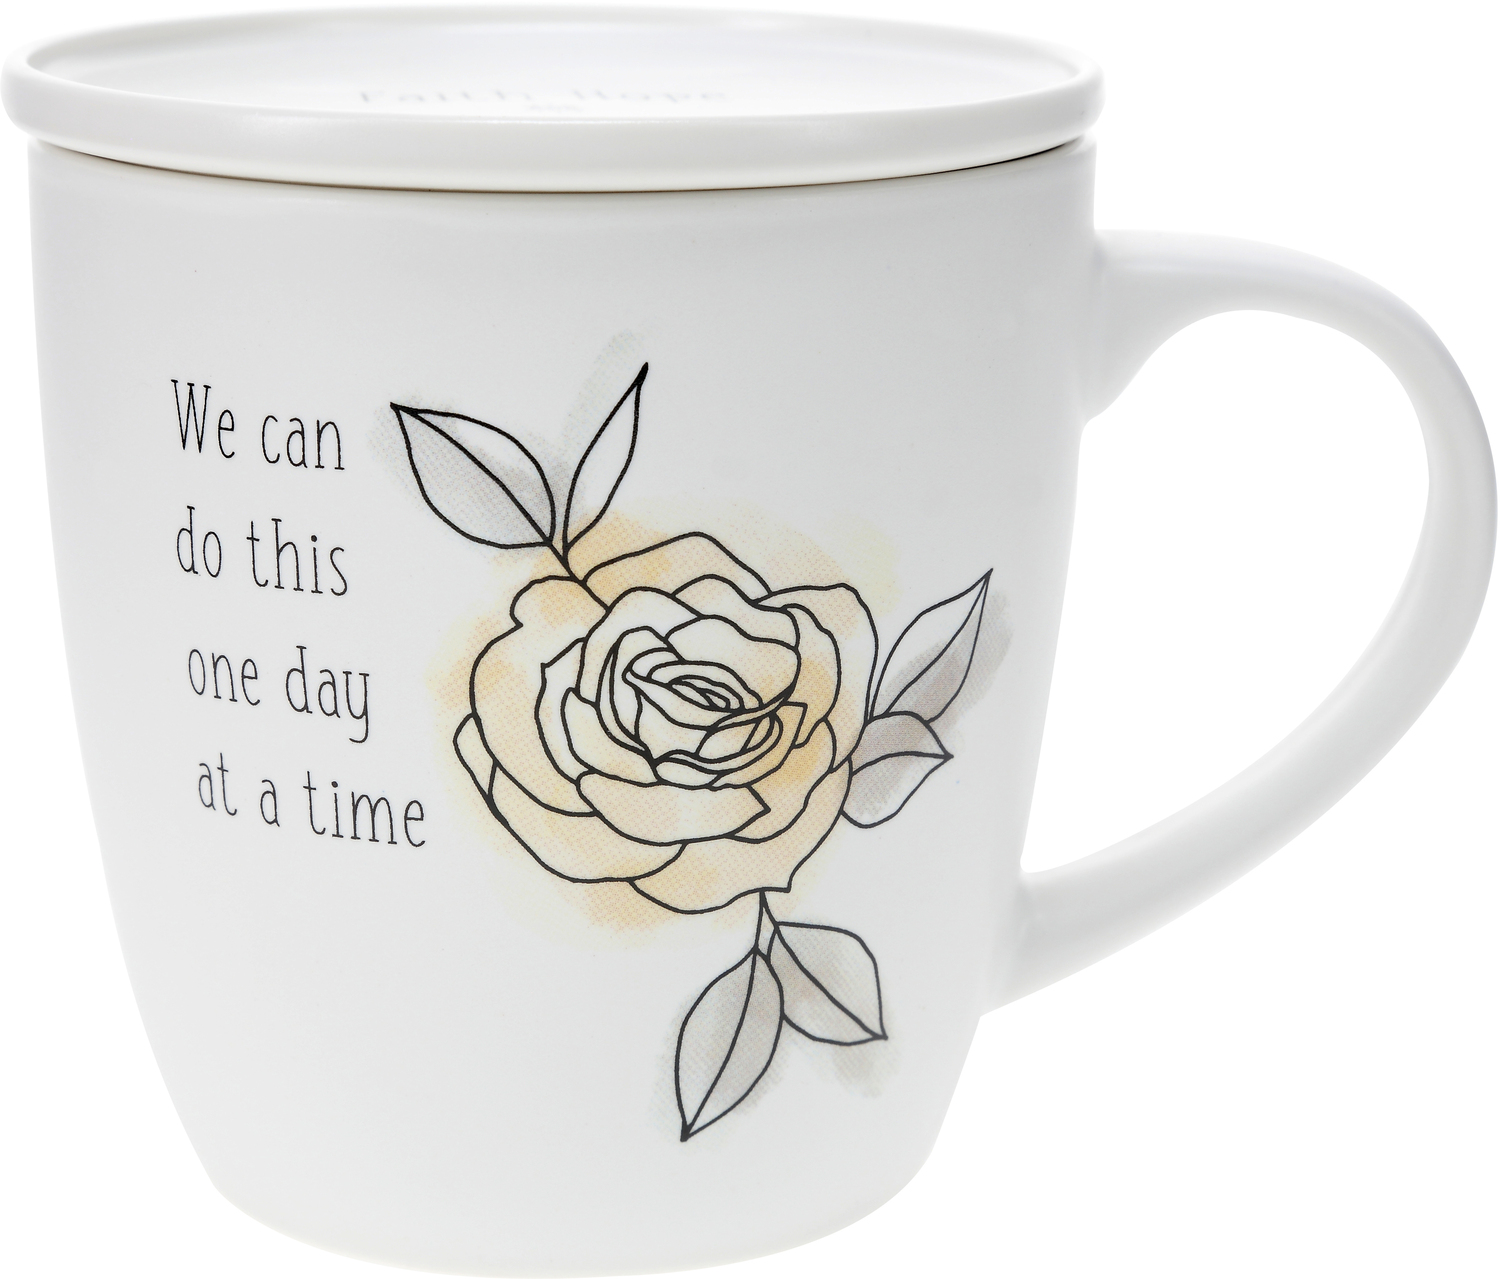 One Day at a Time by Faith Hope and Healing - One Day at a Time - 17 oz Cup with Coaster Lid